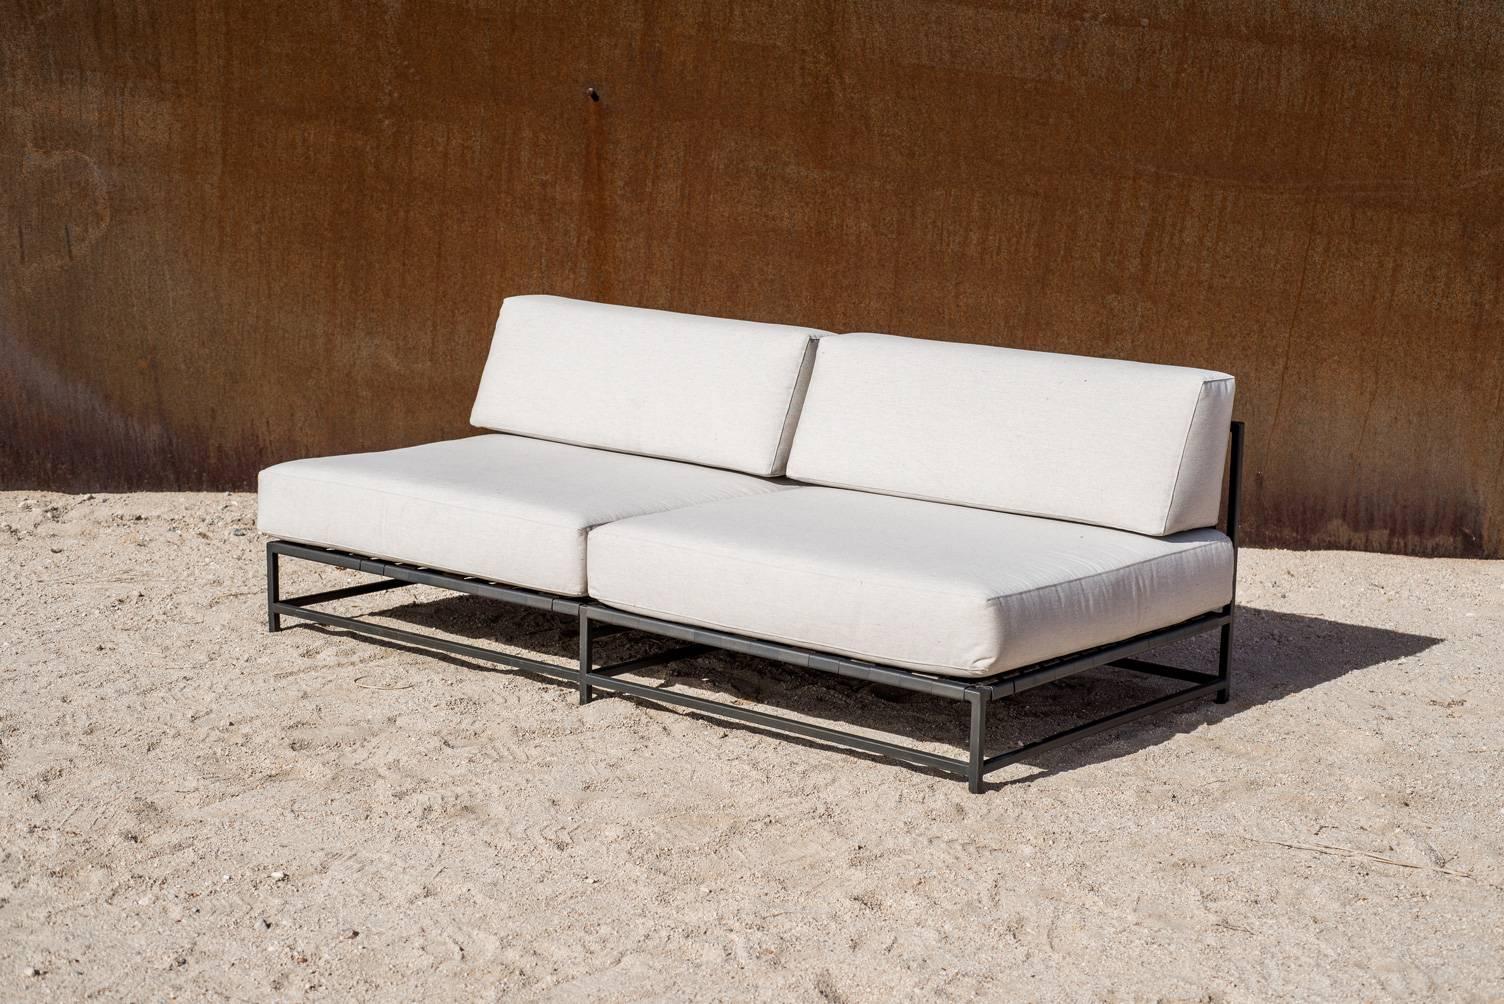 Powder-Coated Outdoor Cream and Charcoal Loveseat For Sale